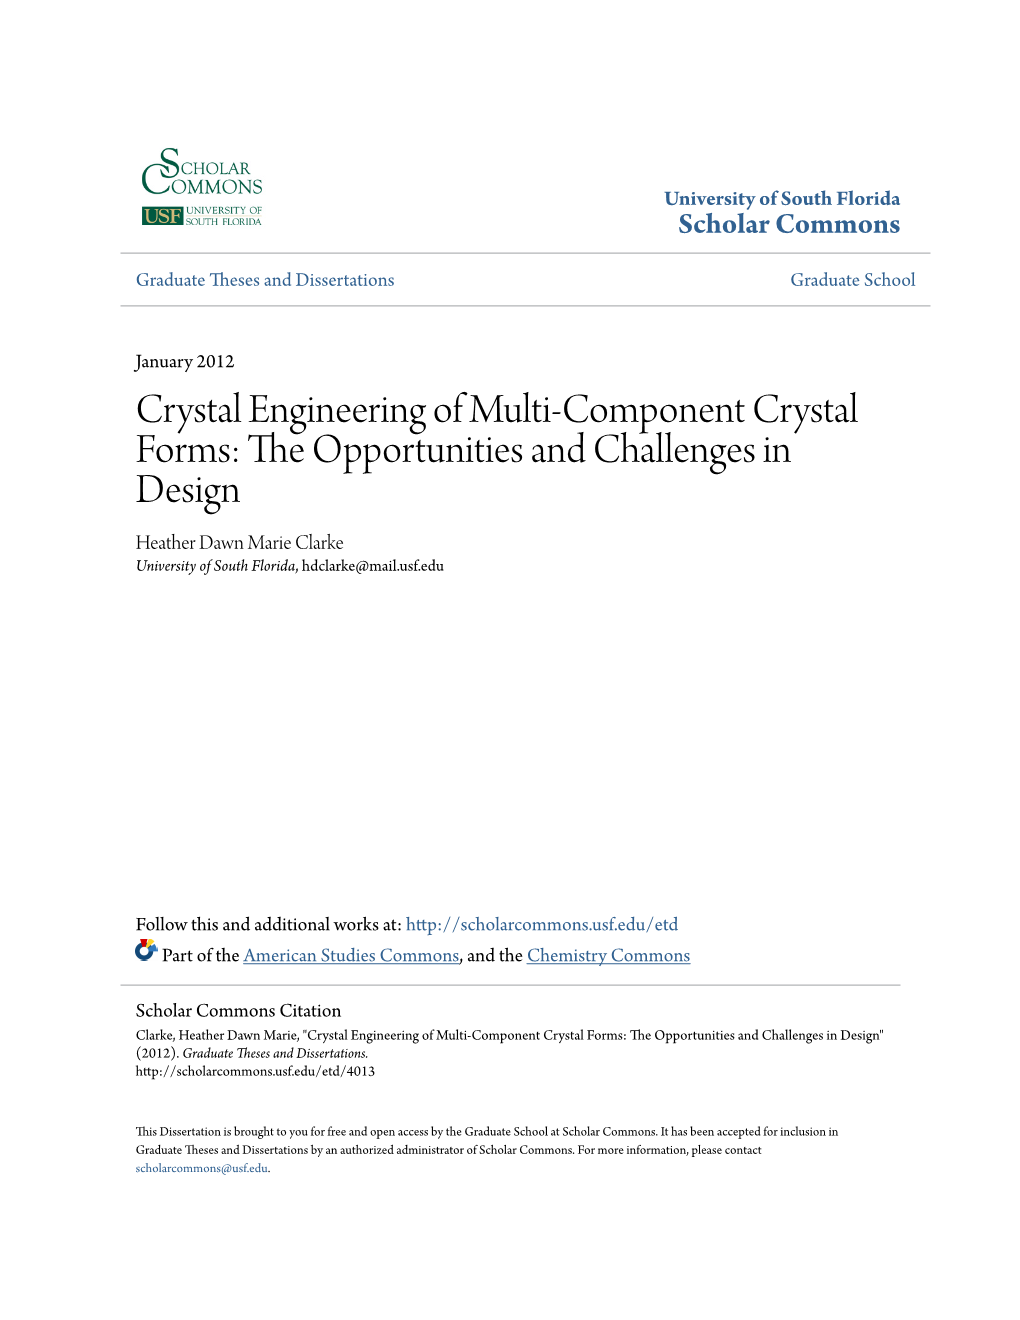 Crystal Engineering of Multi-Component Crystal Forms